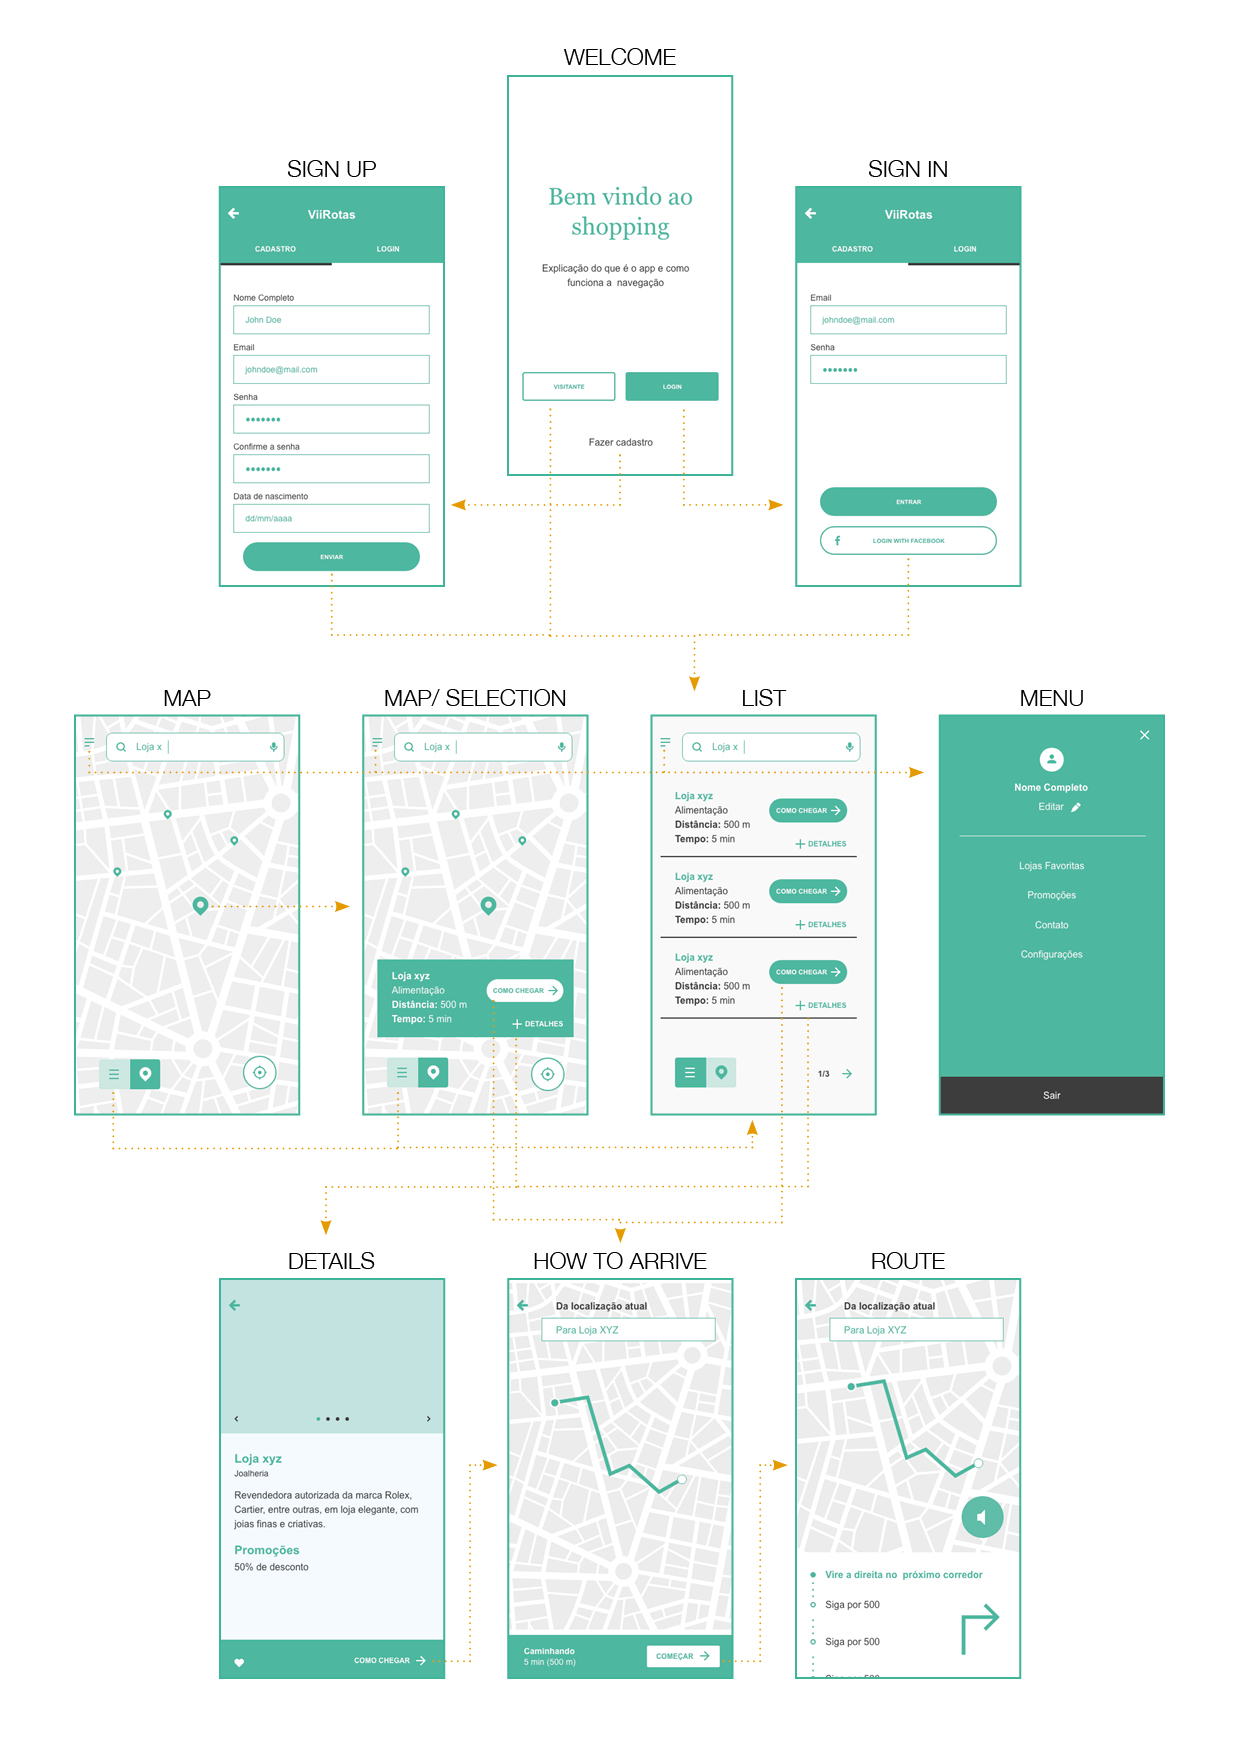 Wireframes and navigational flow